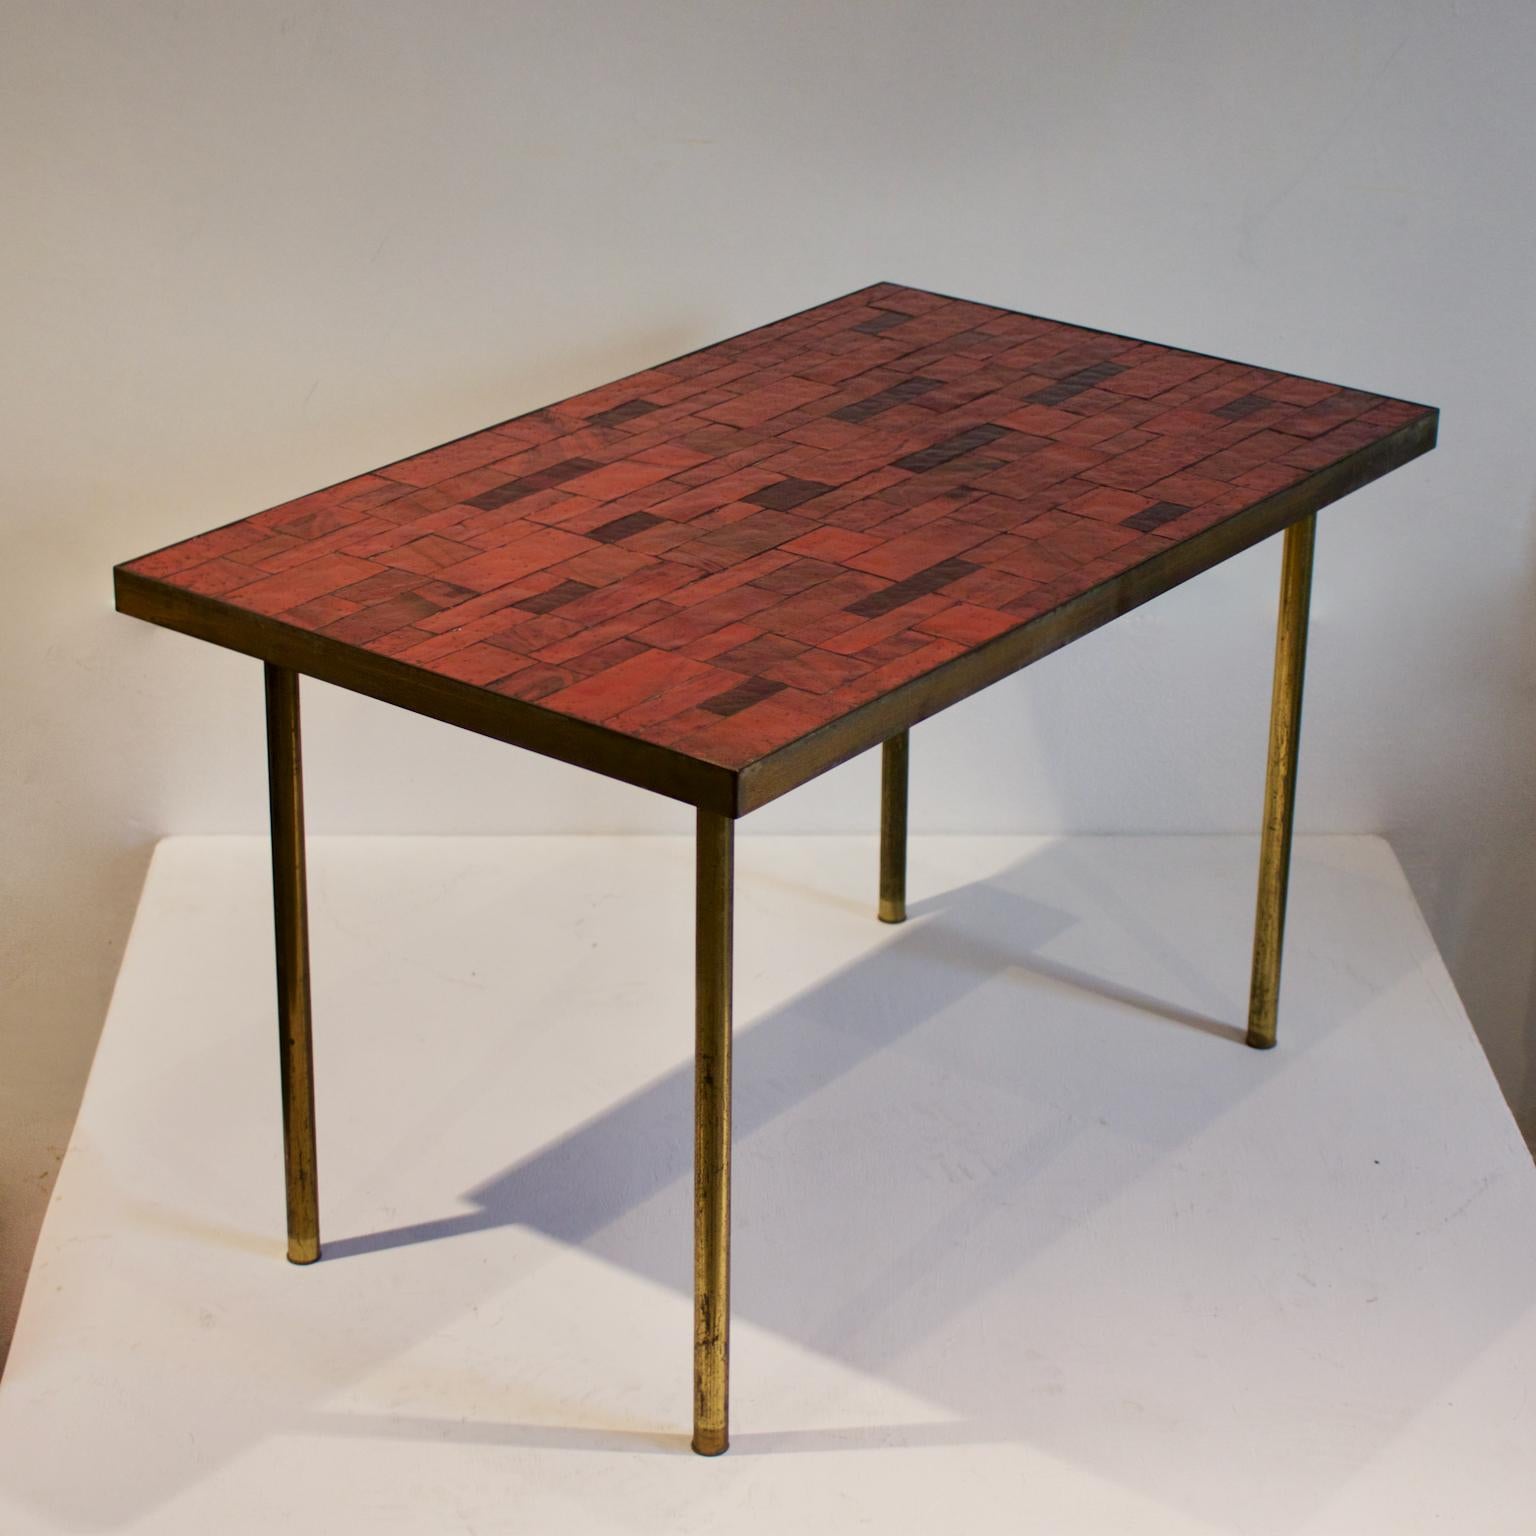 A mosaic side table in warm red tones, by Berthold Müller, Germany, mid-20th century.

The table is covered in rectangular stone mosaic tiles on wood, with a bronze or brass surround. The top sits on brass legs, each screwed into the wood. This